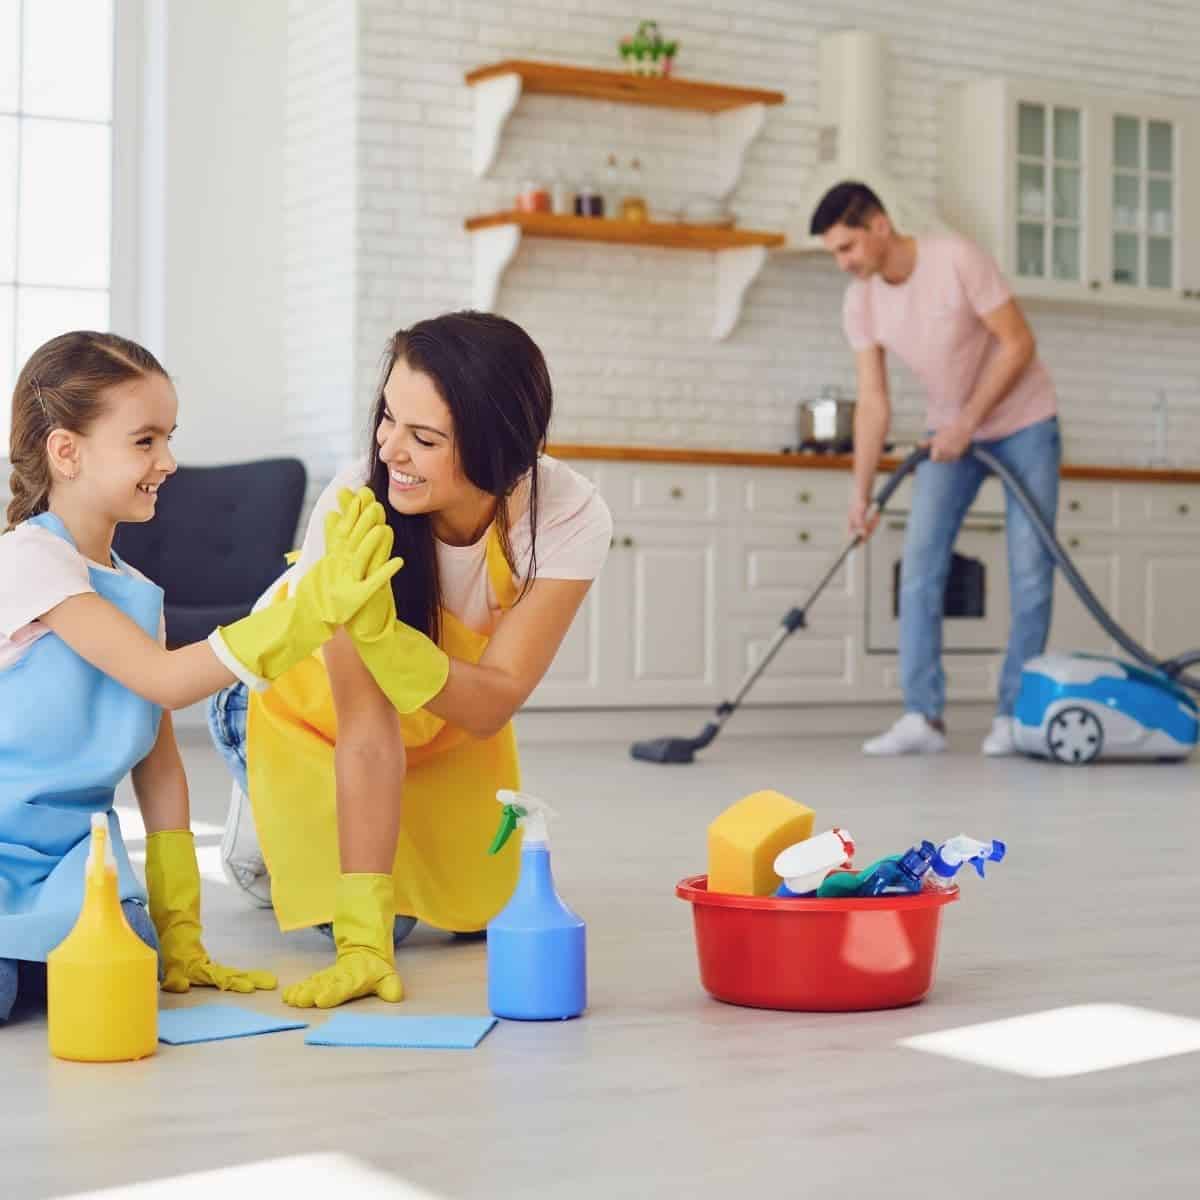 Clean Faster with These 15 Genius Speed Cleaning Tips - Simplify